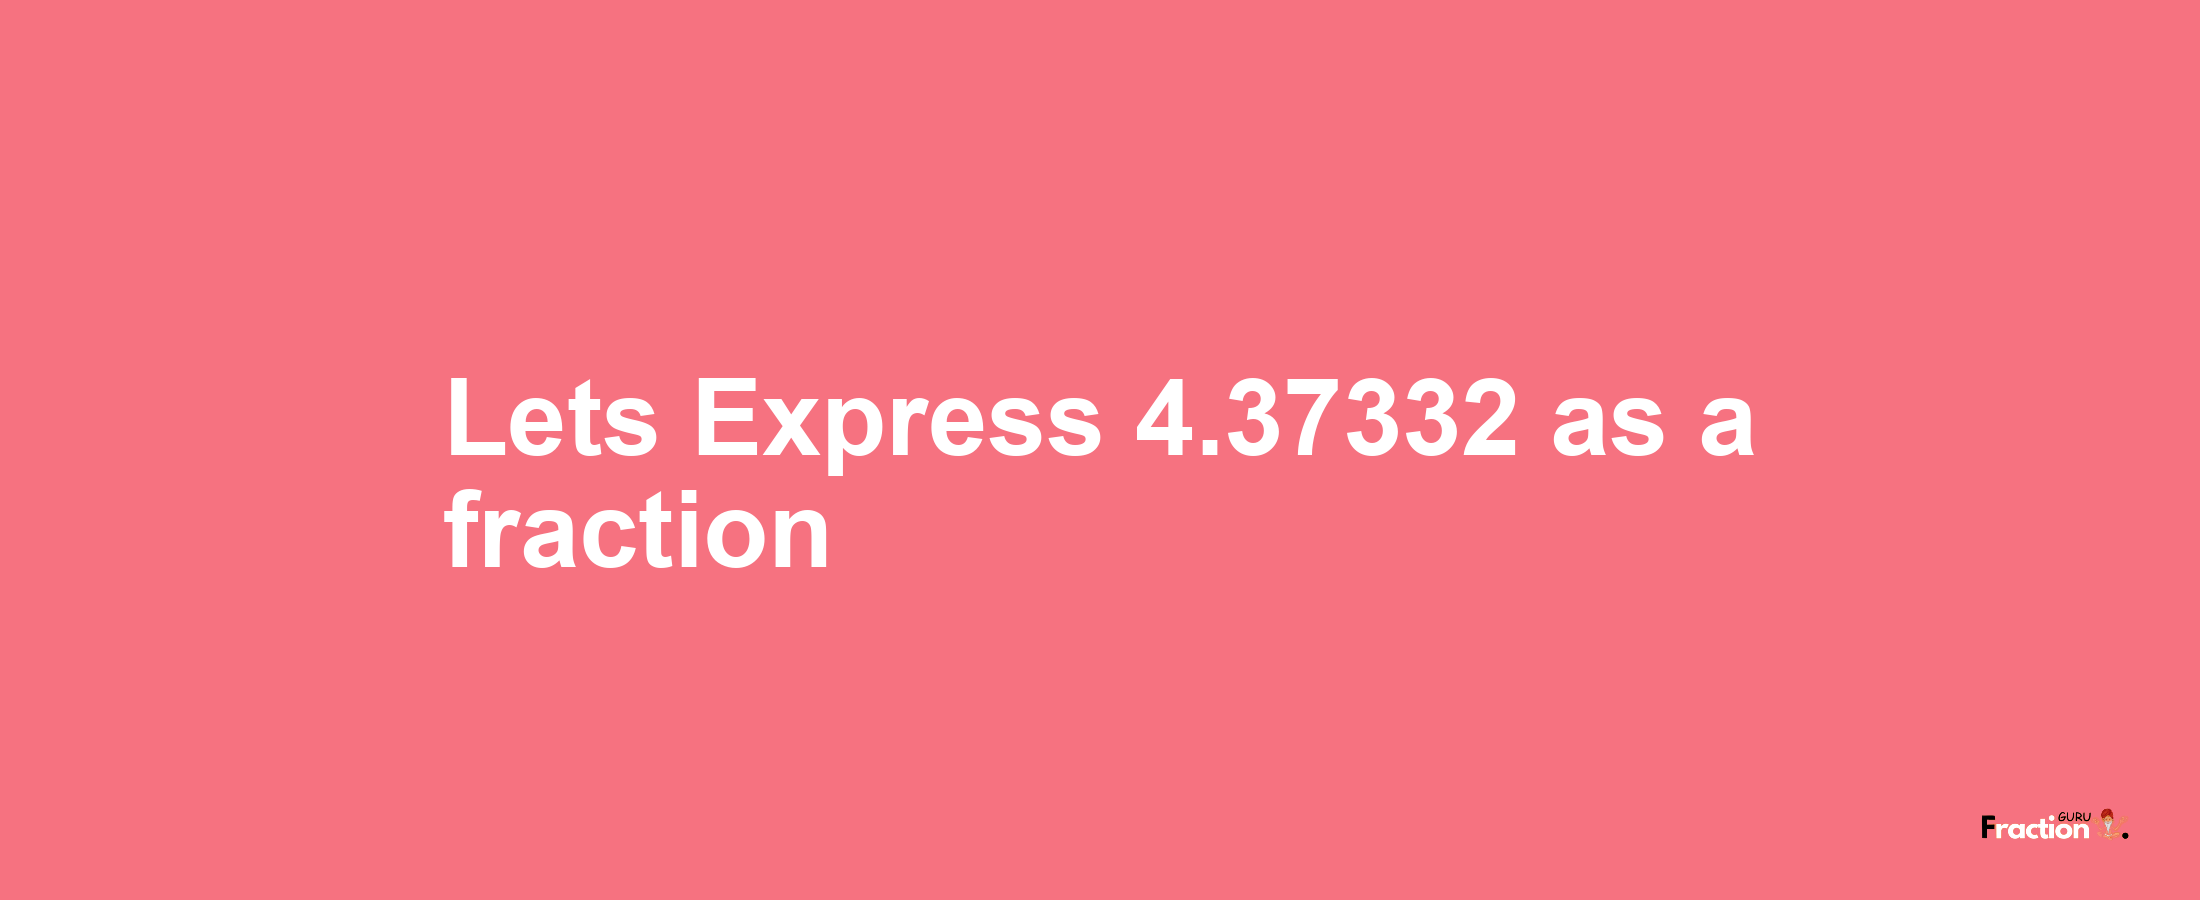 Lets Express 4.37332 as afraction